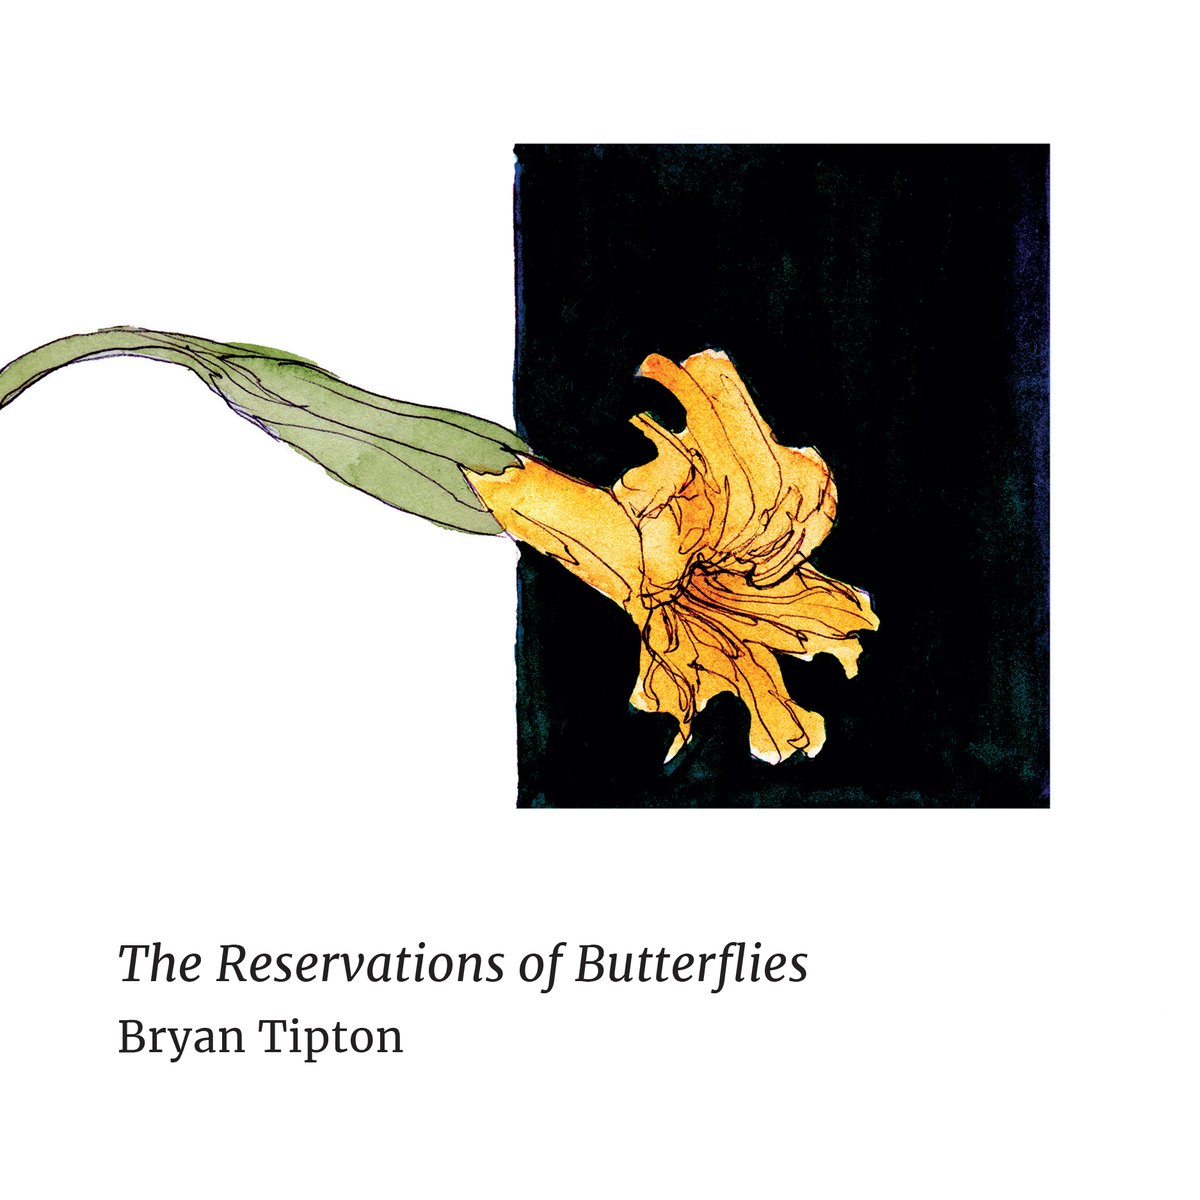 Image of Finch: The Reservations of Butterflies